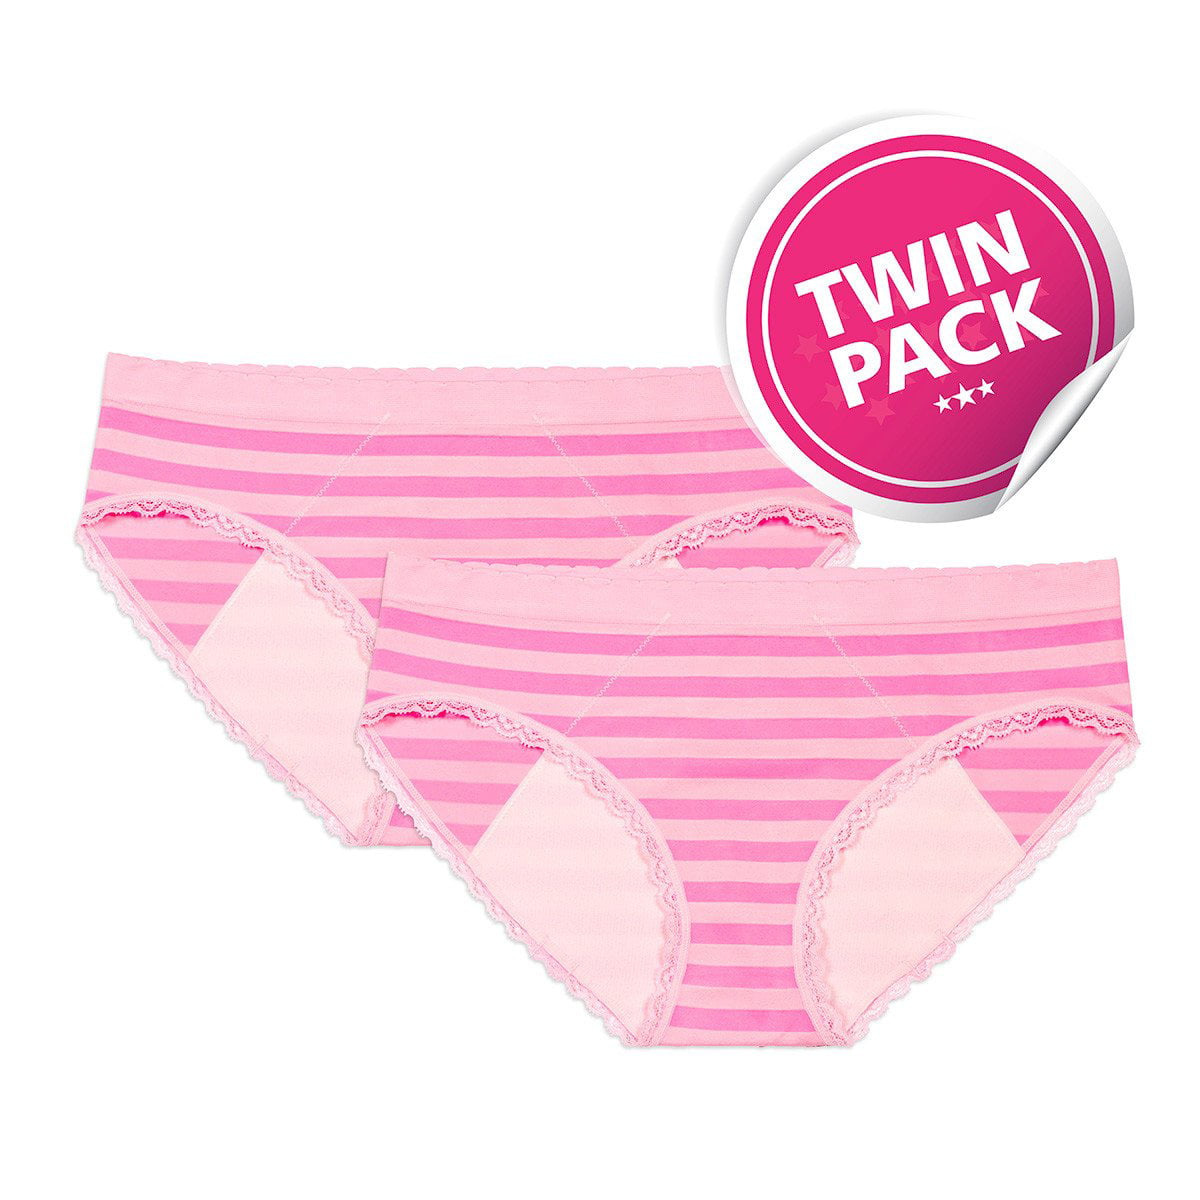 Buy Medium Flow Period Knickers 2 Pack from the Laura Ashley